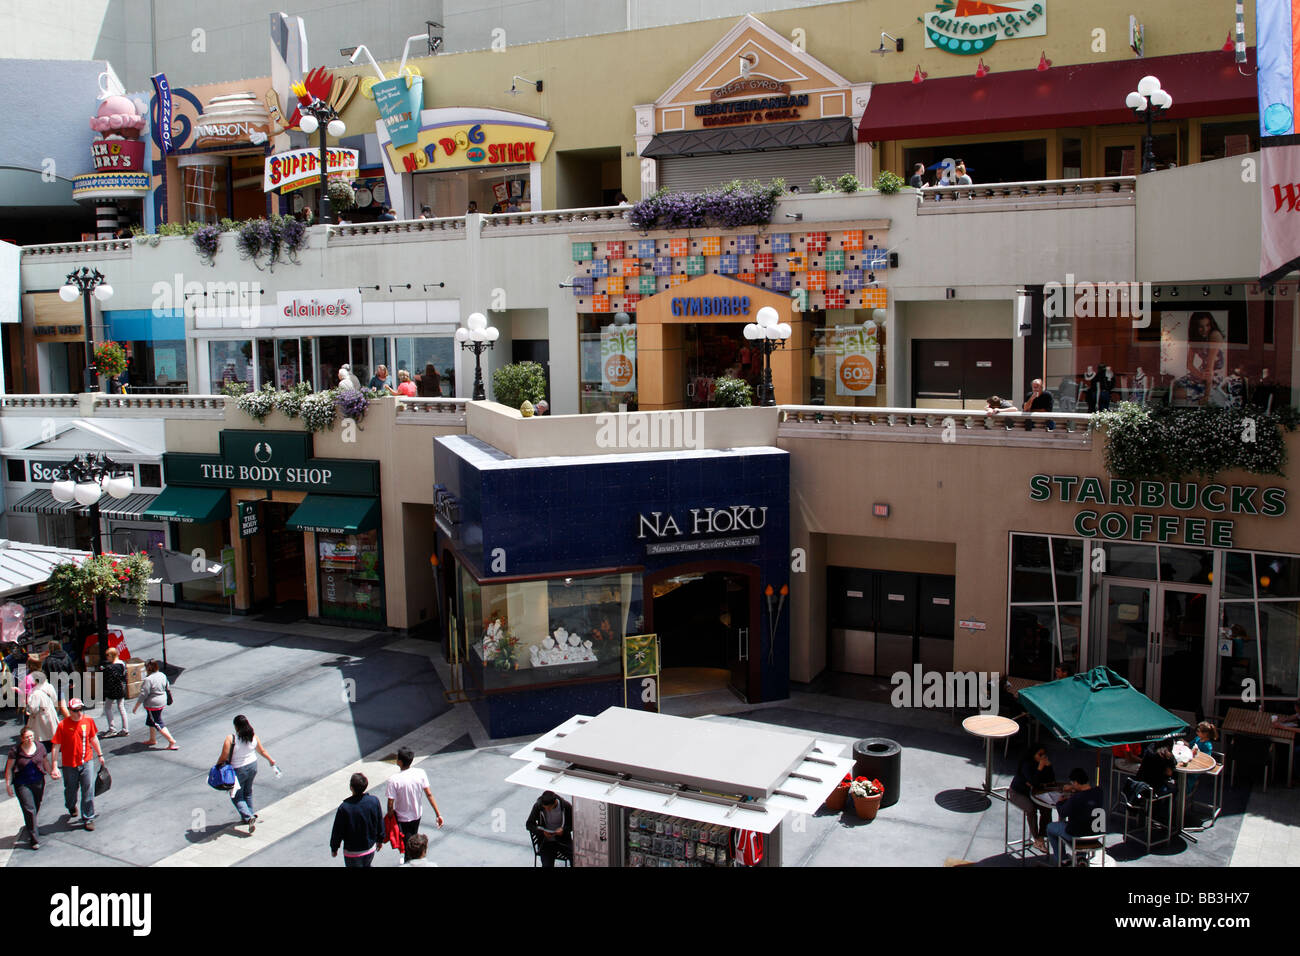 Horton Plaza shopping mall, San Diego, USA - outdoor and indoor shopping  precinct in heart of city Stock Photo - Alamy